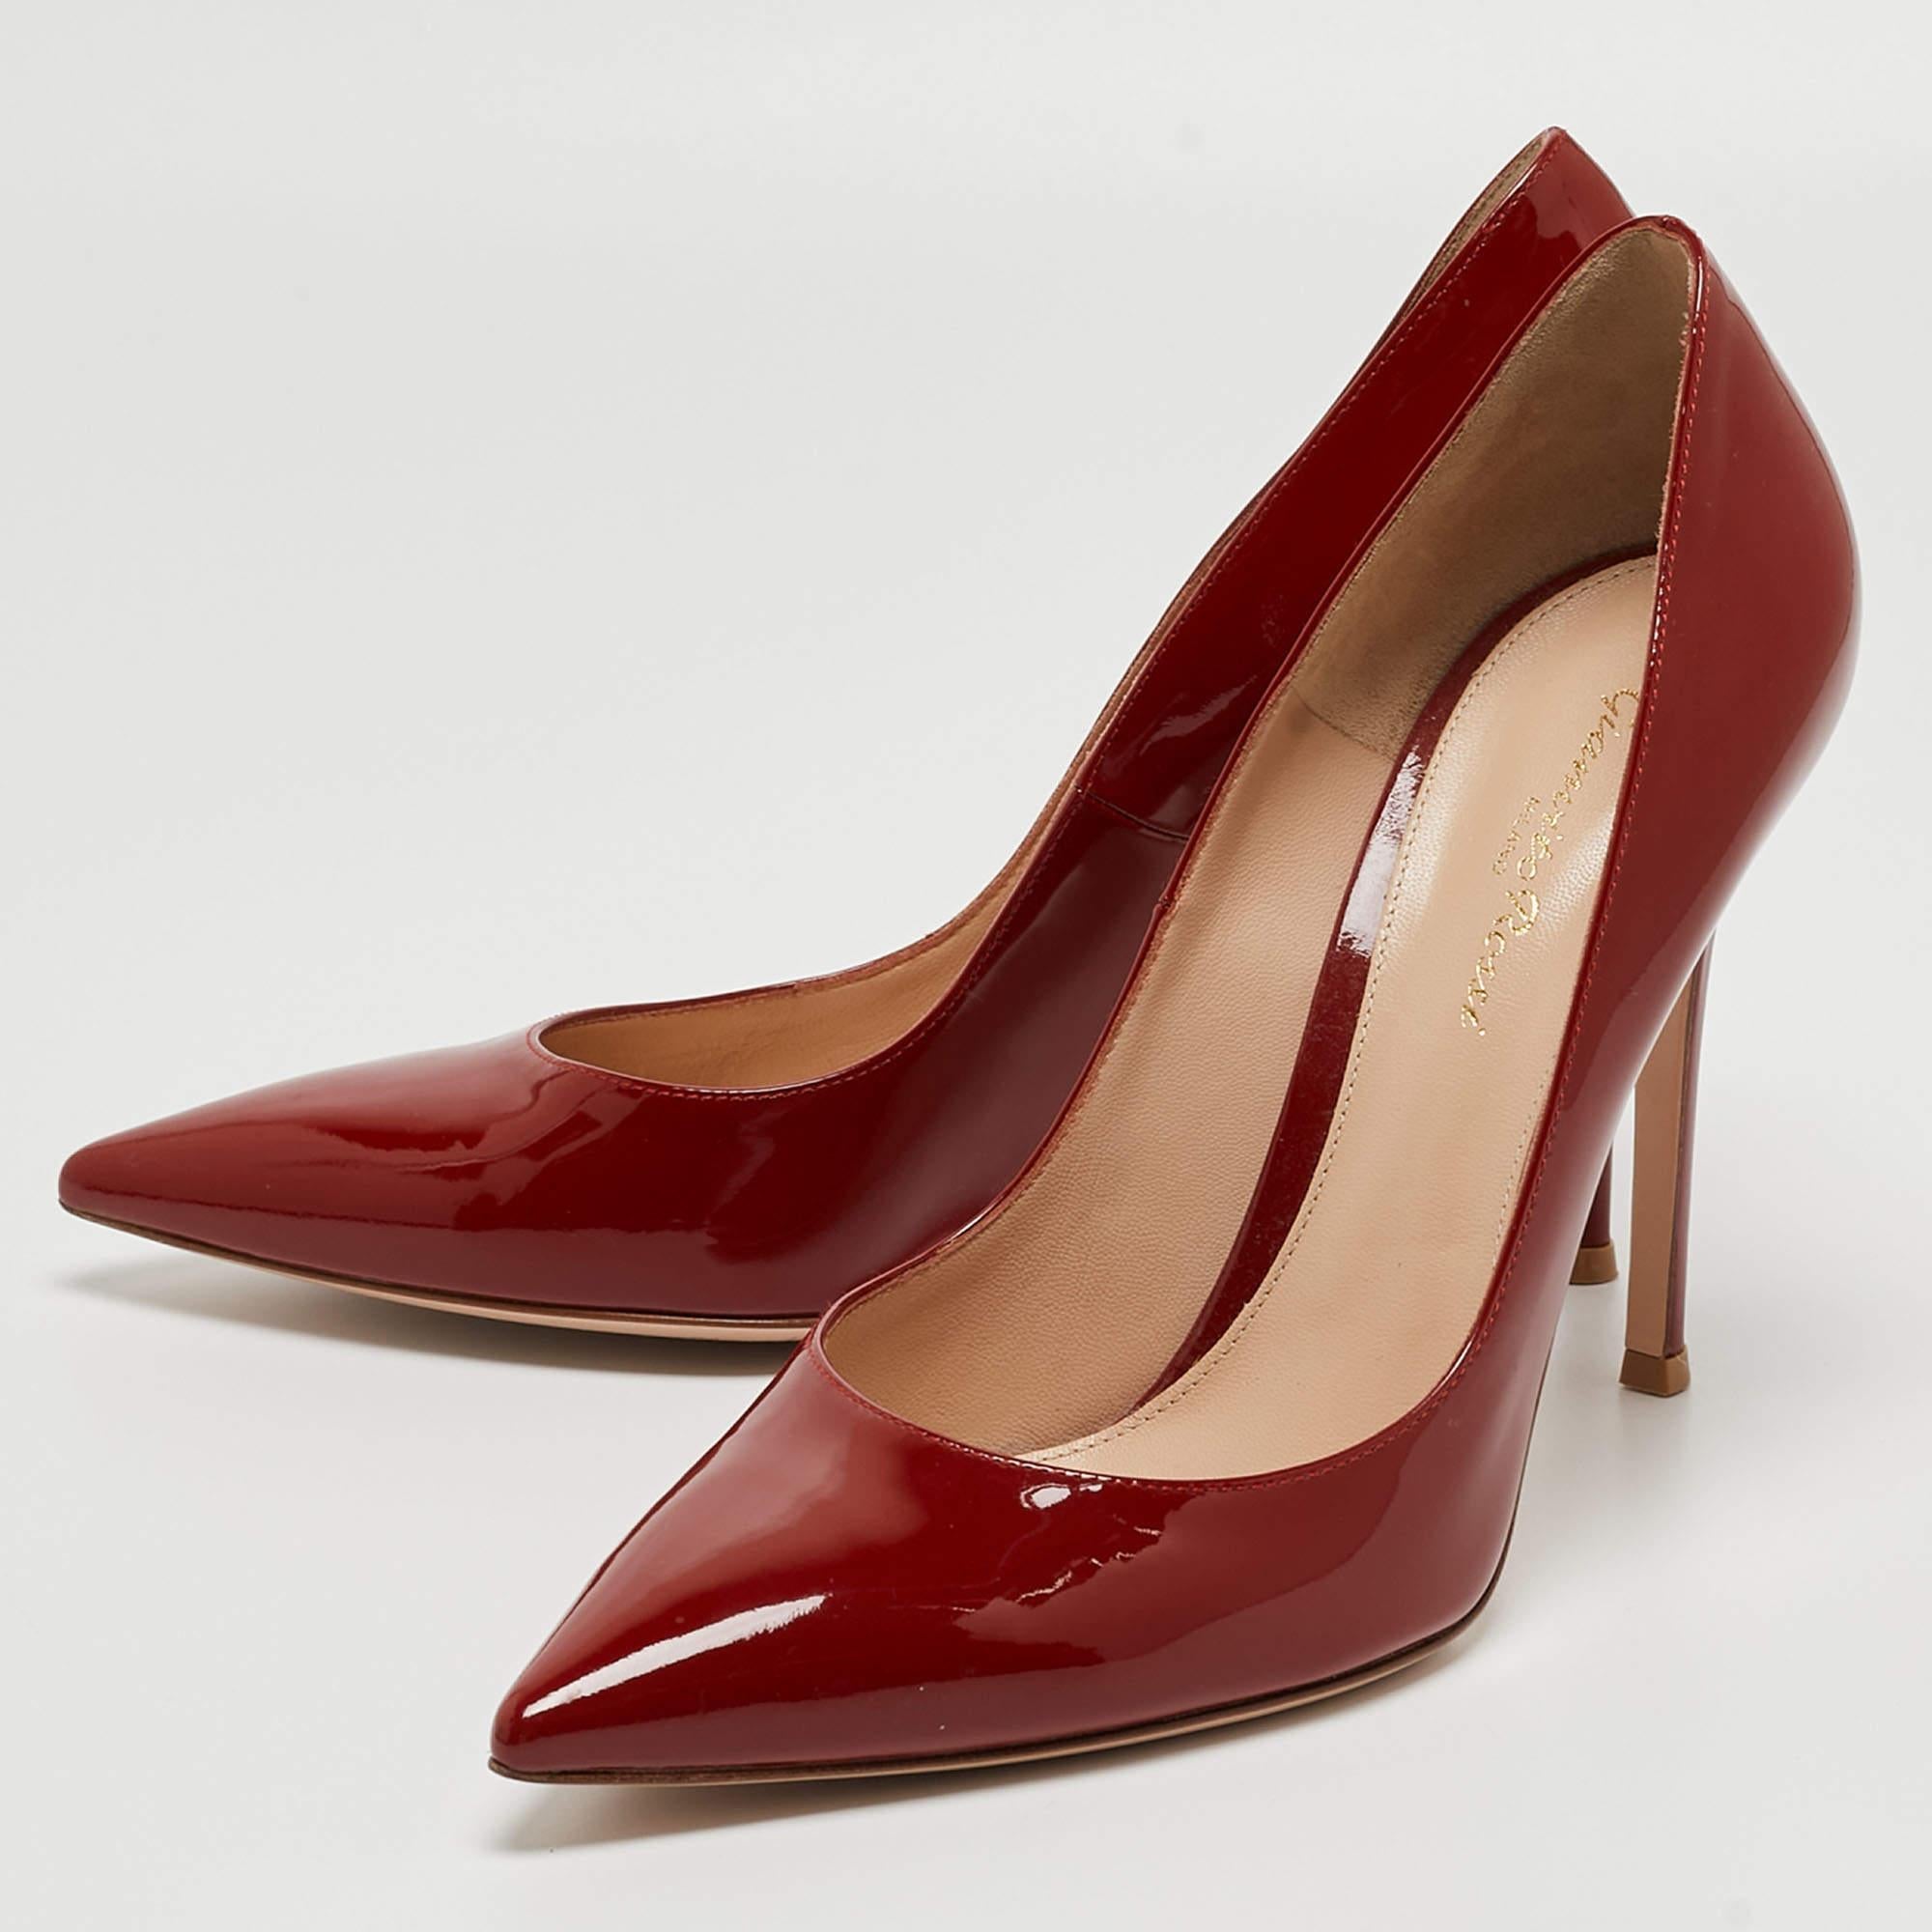 Gianvito Rossi Dark Red Patent Leather Pointed Toe Pumps Size 41 3